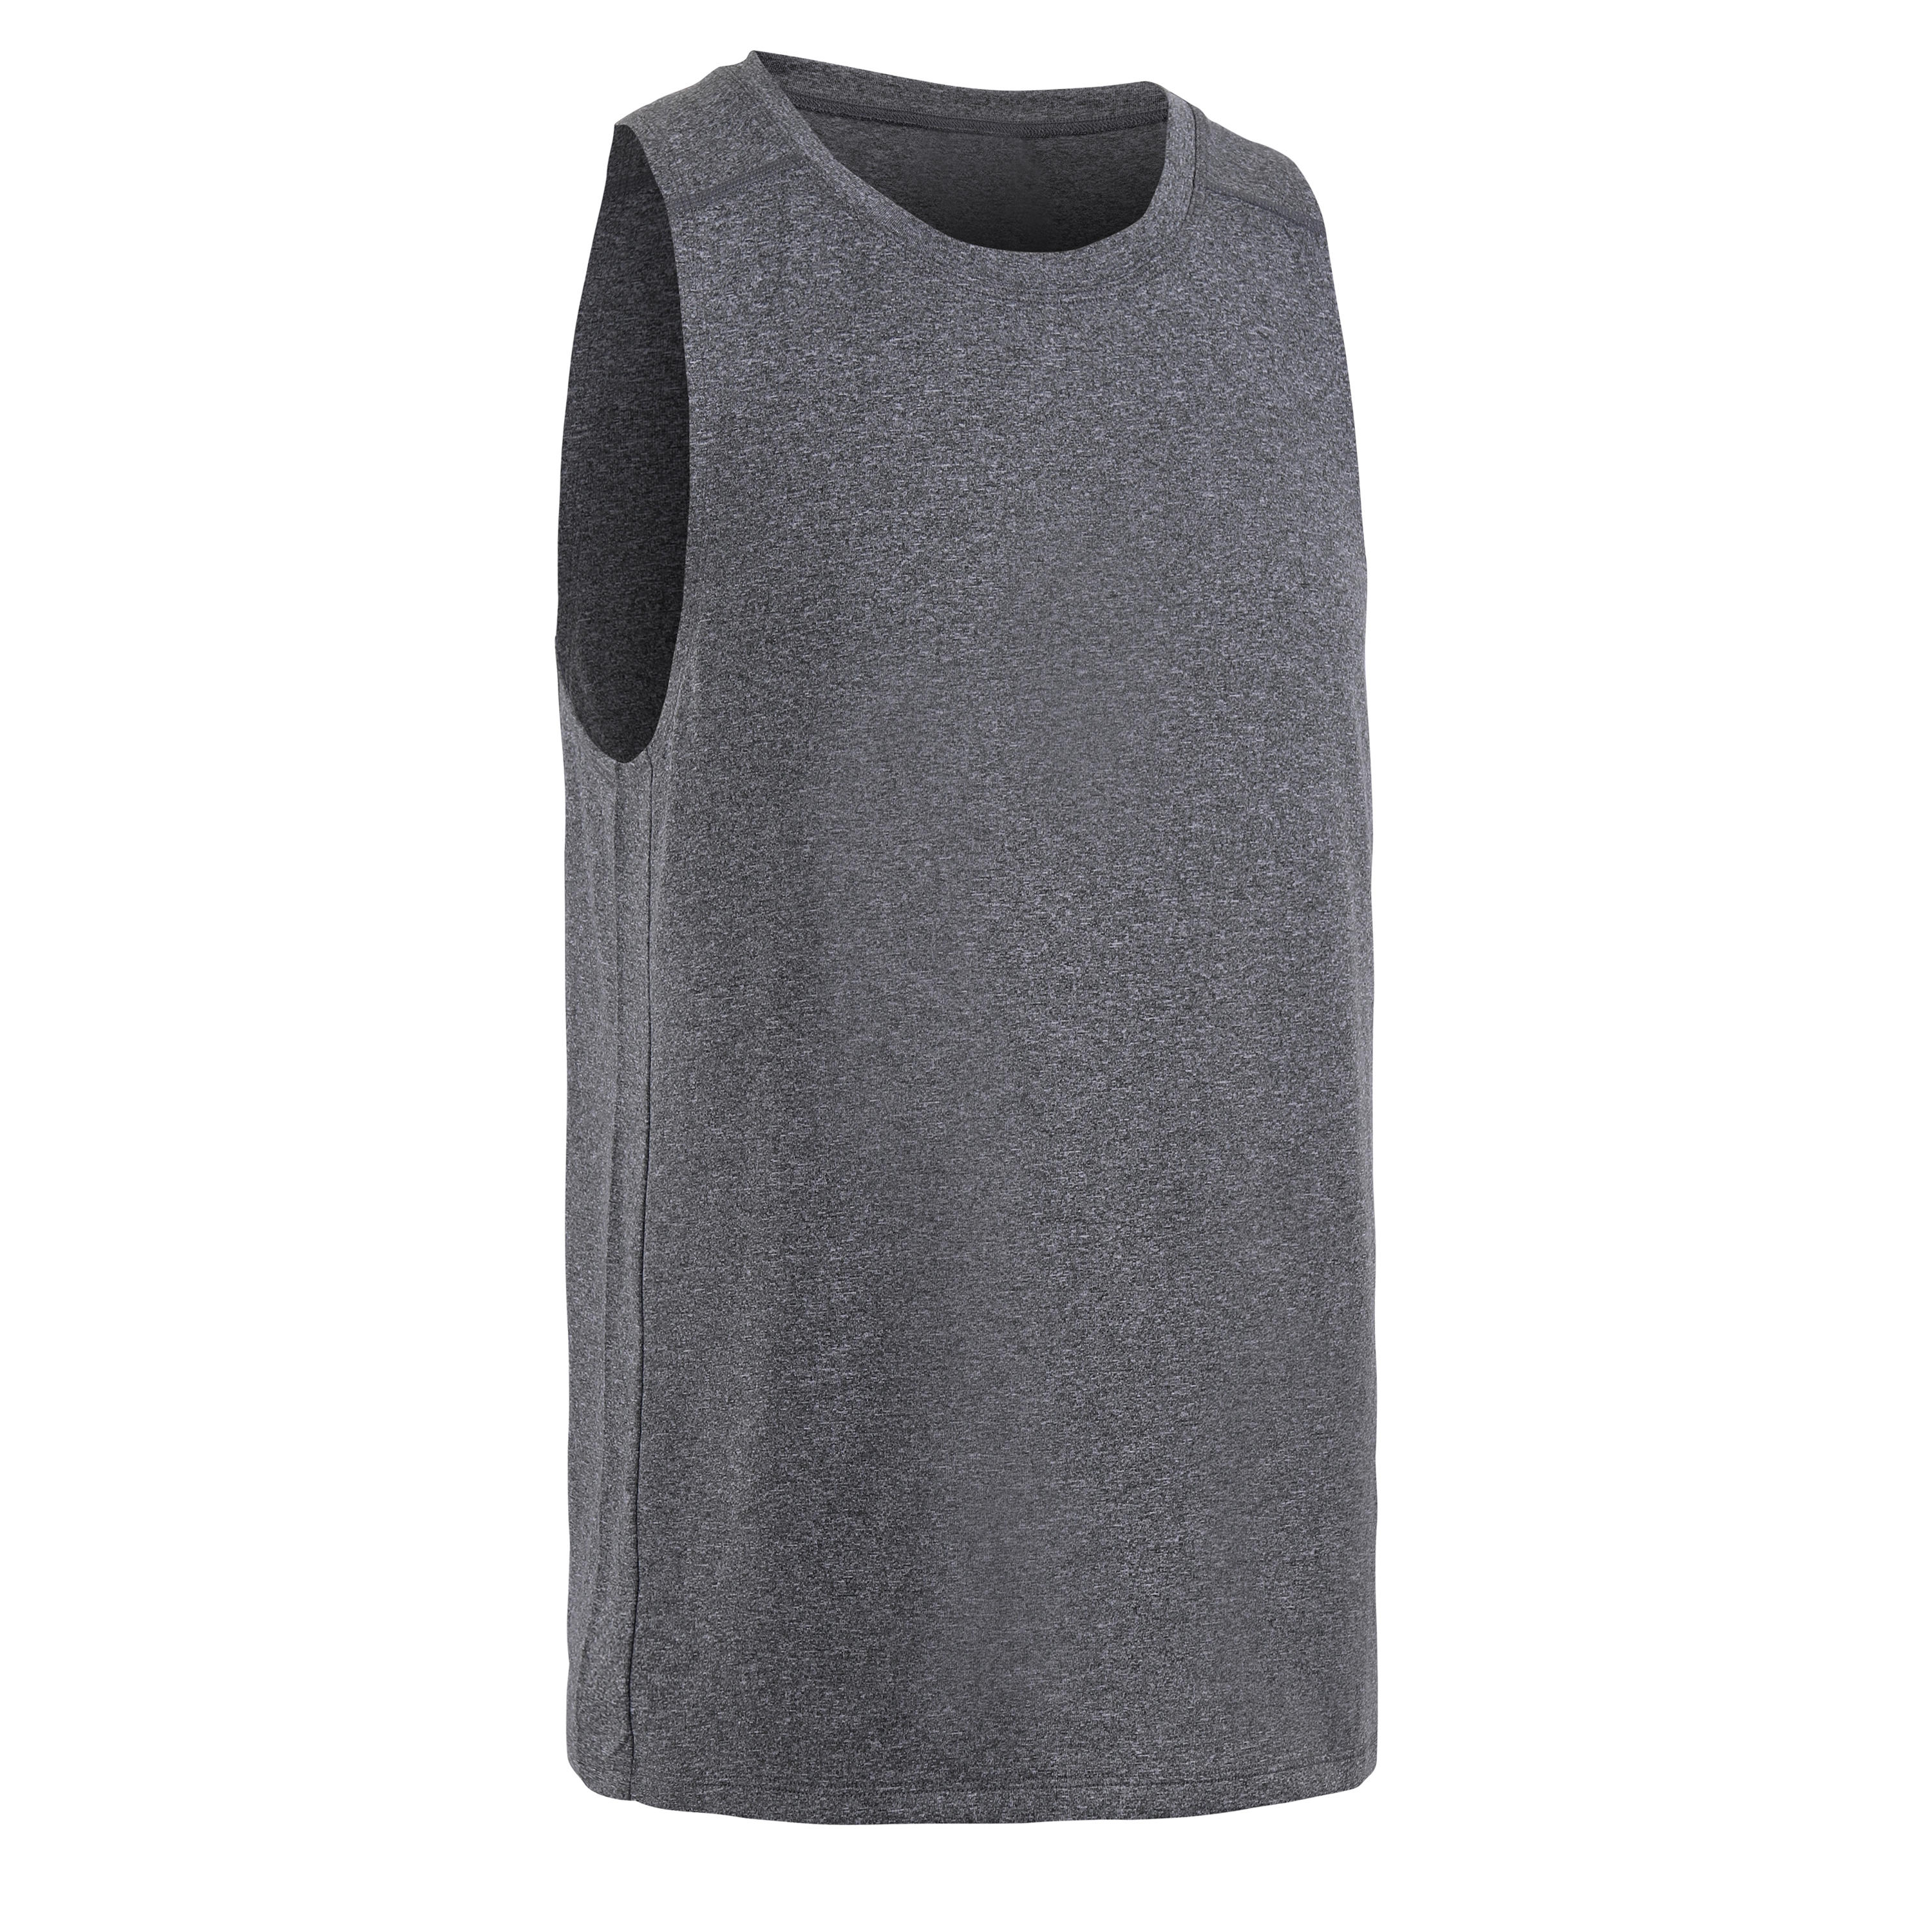 Men's Breathable Crew Neck Essential Collection Fitness Tank Top - Grey 6/6